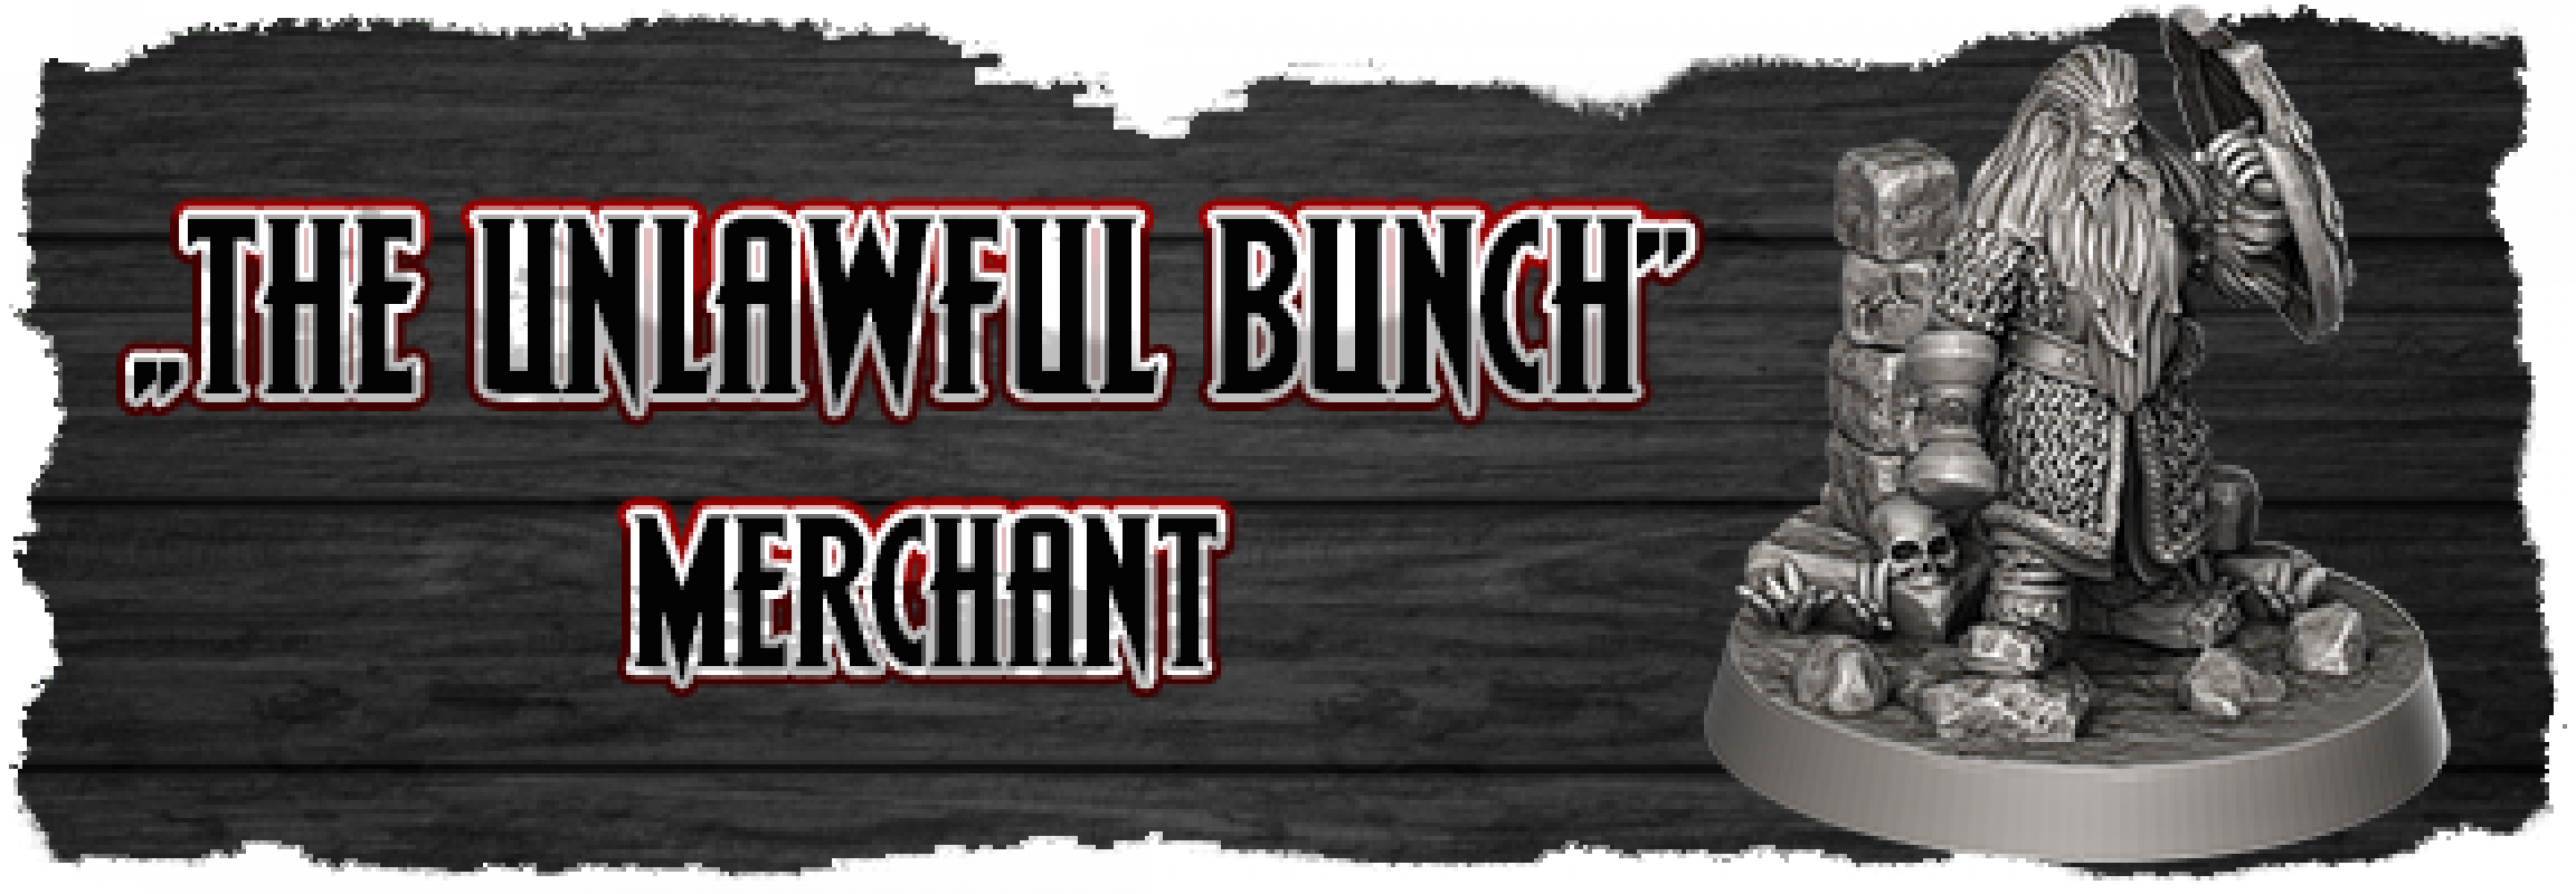 The Unlawful Bunch - Merchant License's Cover